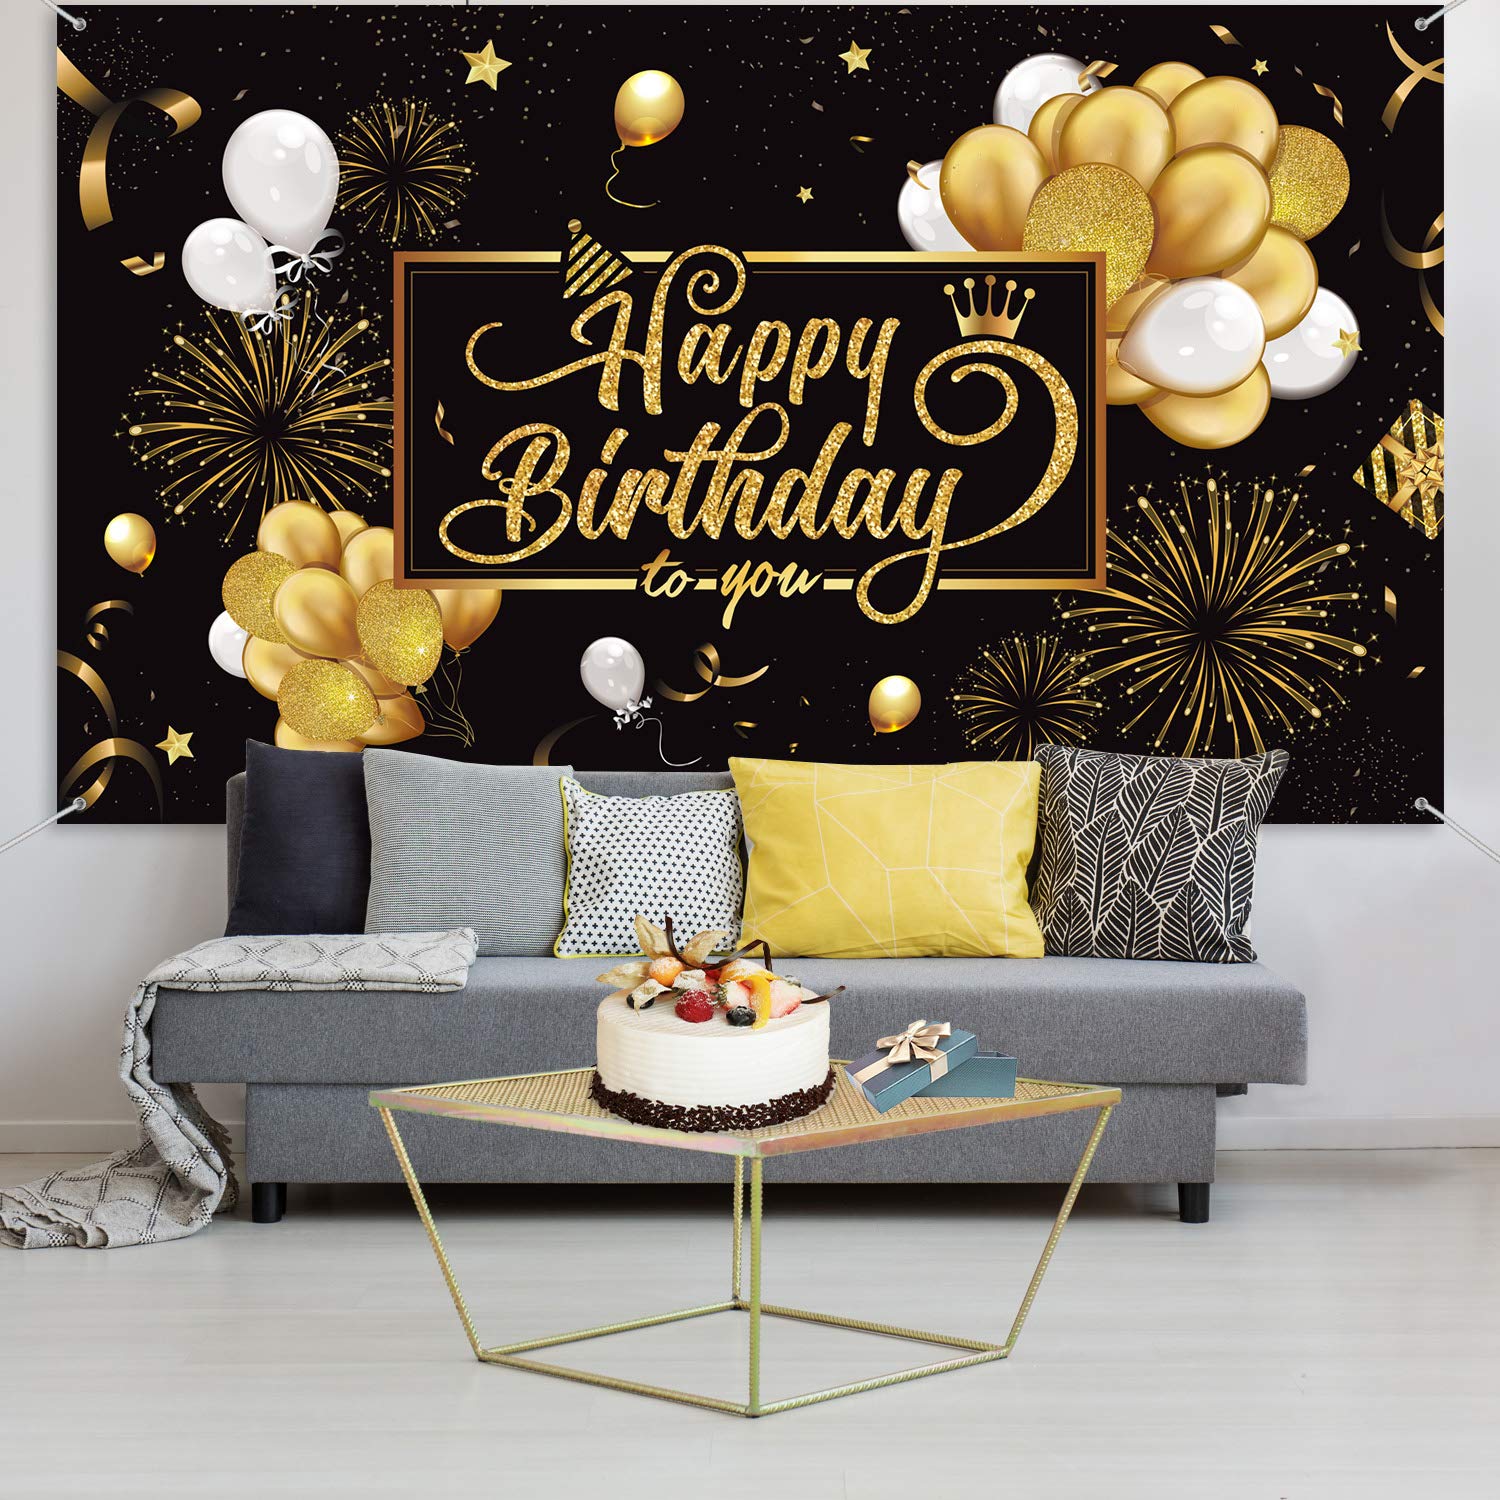 Happy Birthday Backdrop Banner Large Black Gold Balloon Star Fireworks Party Sign Poster Photo Booth Backdrop for Men Women 30th 40th 50th 60th 70th 80th Birthday Party Decorations, 72.8 x 43.3 Inch